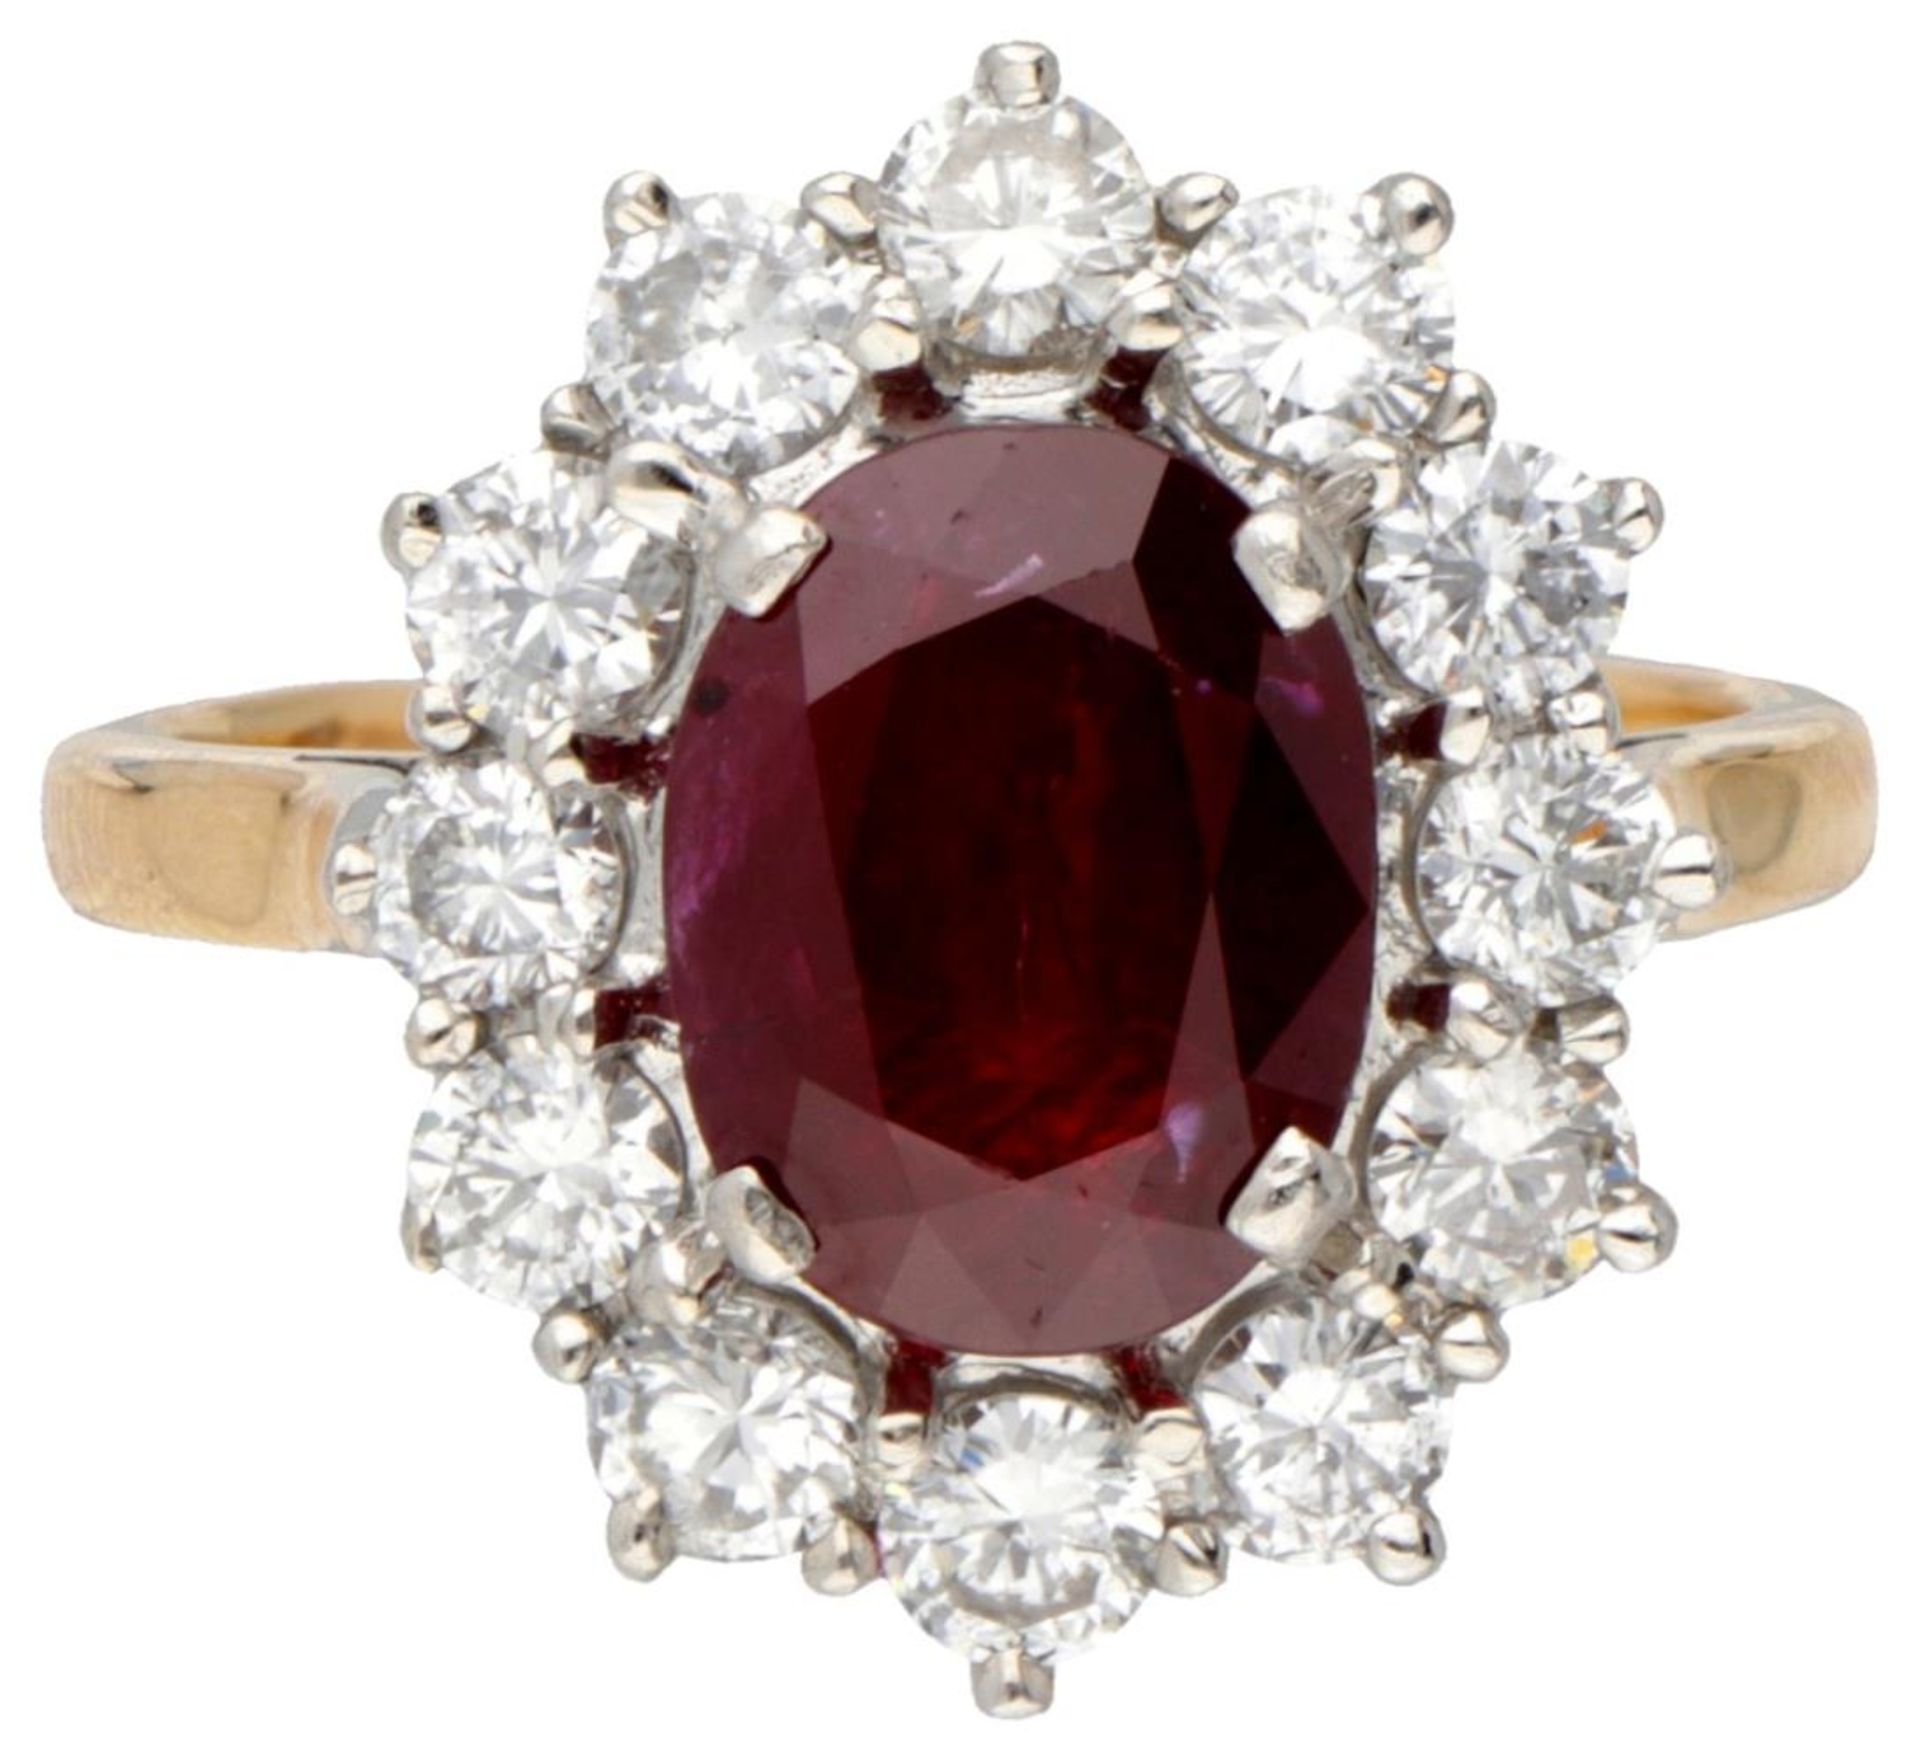 18K. Yellow gold entourage ring set with approx. 1.08 ct. diamond and ruby. - Image 4 of 6